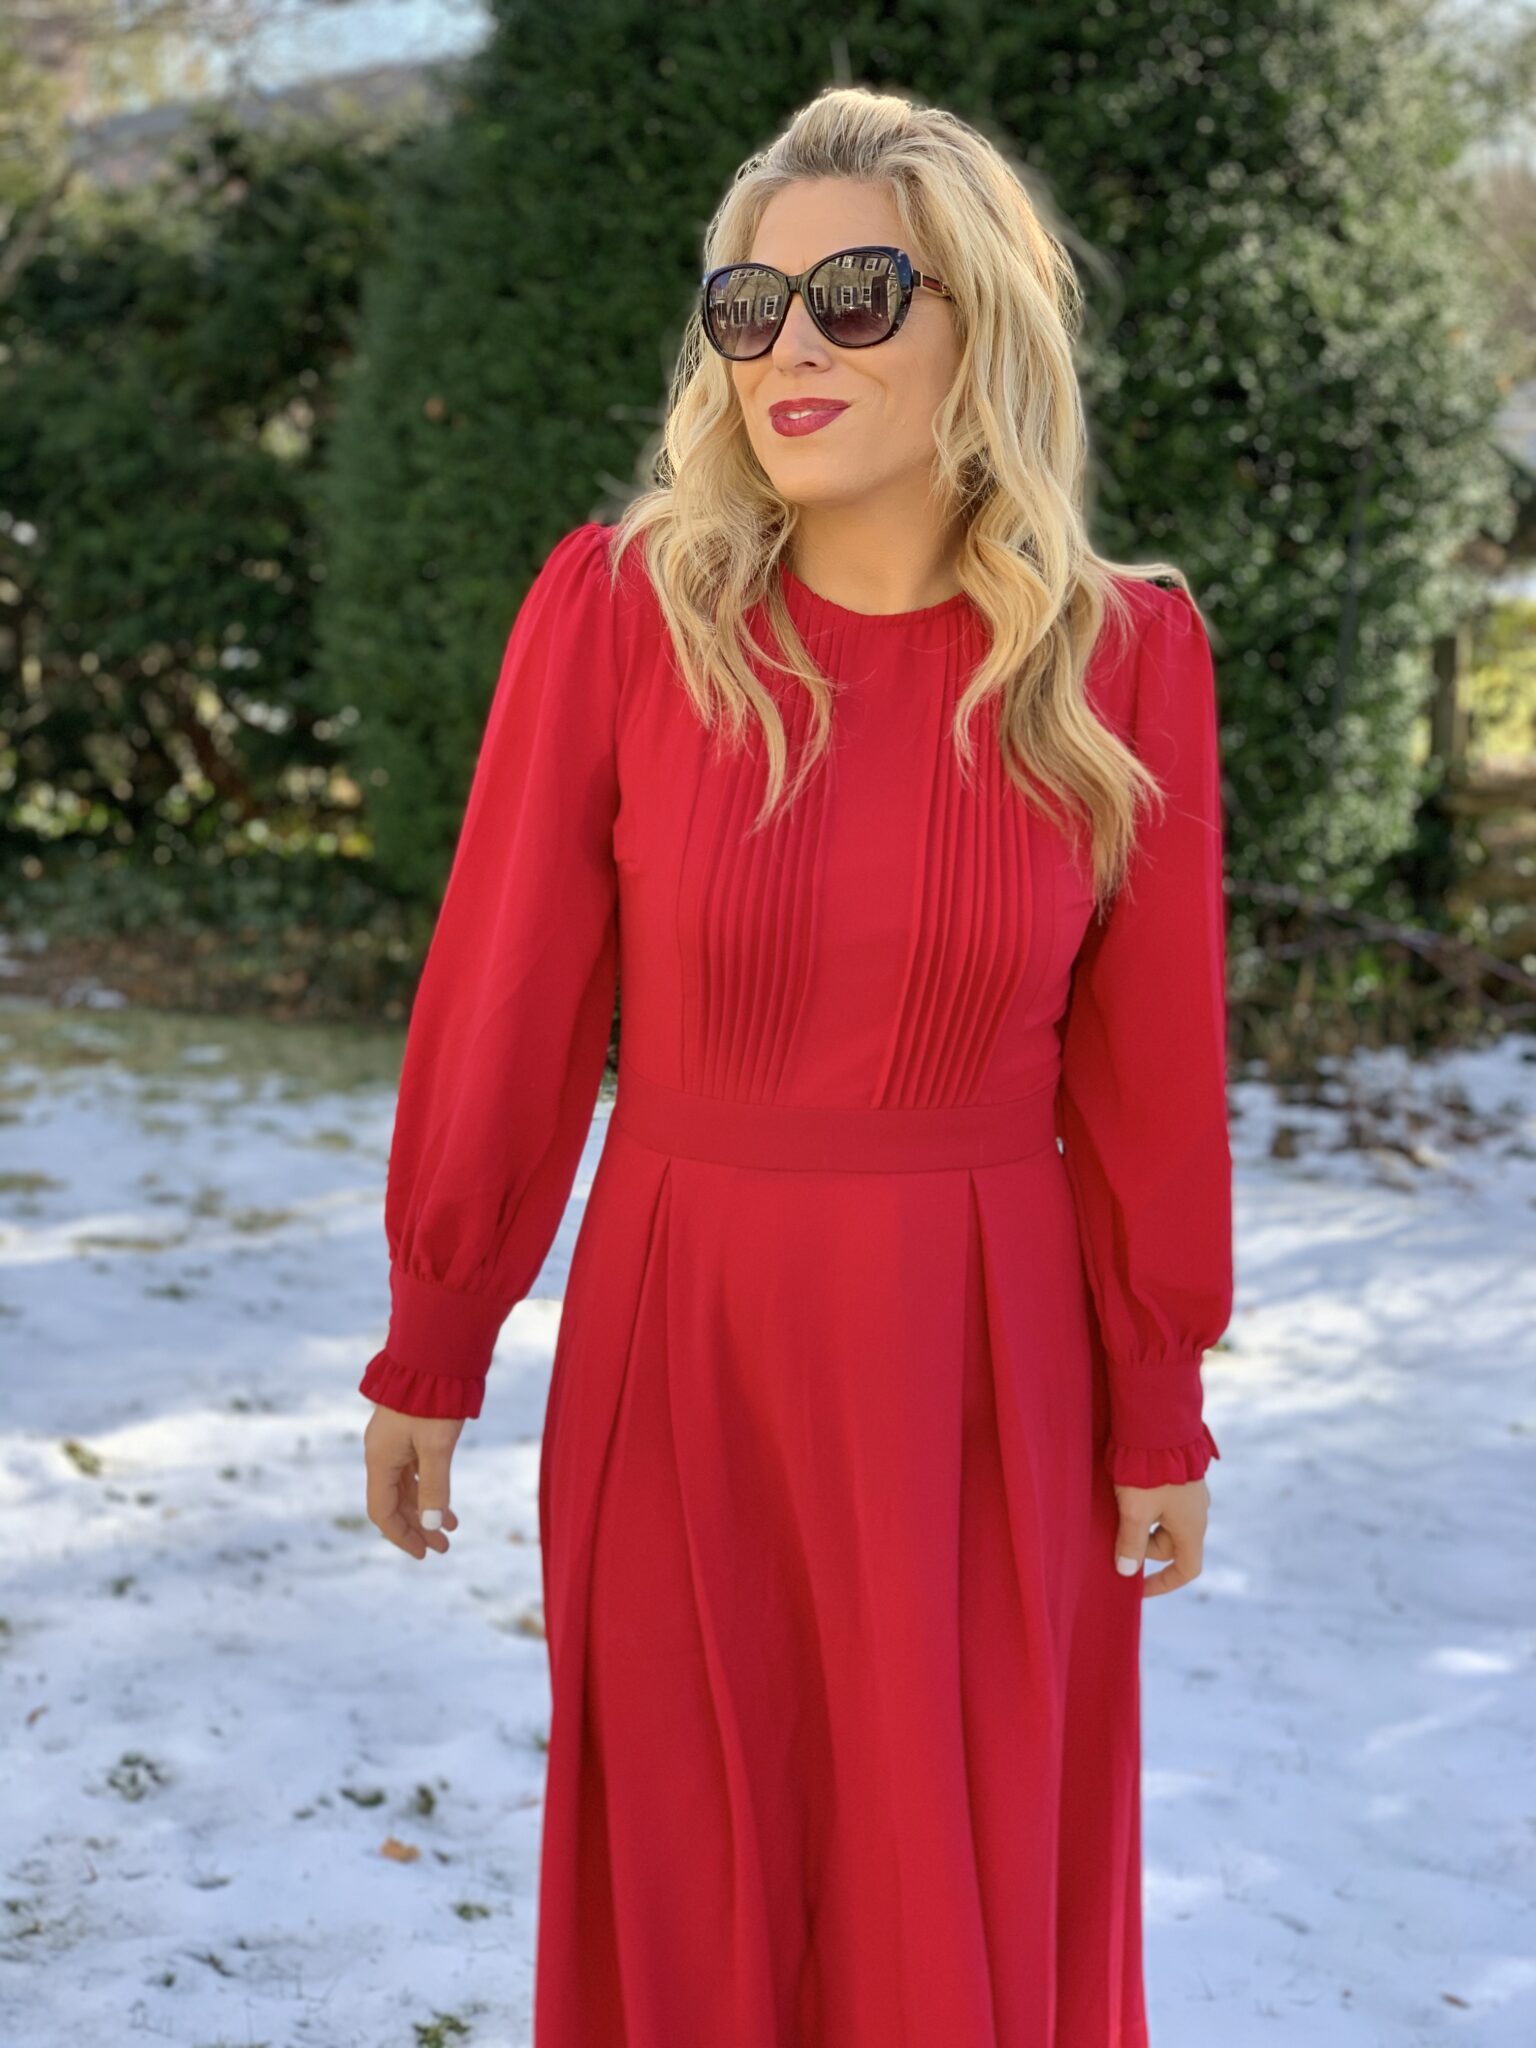 Red Party Dresses - Stylish Life for Moms